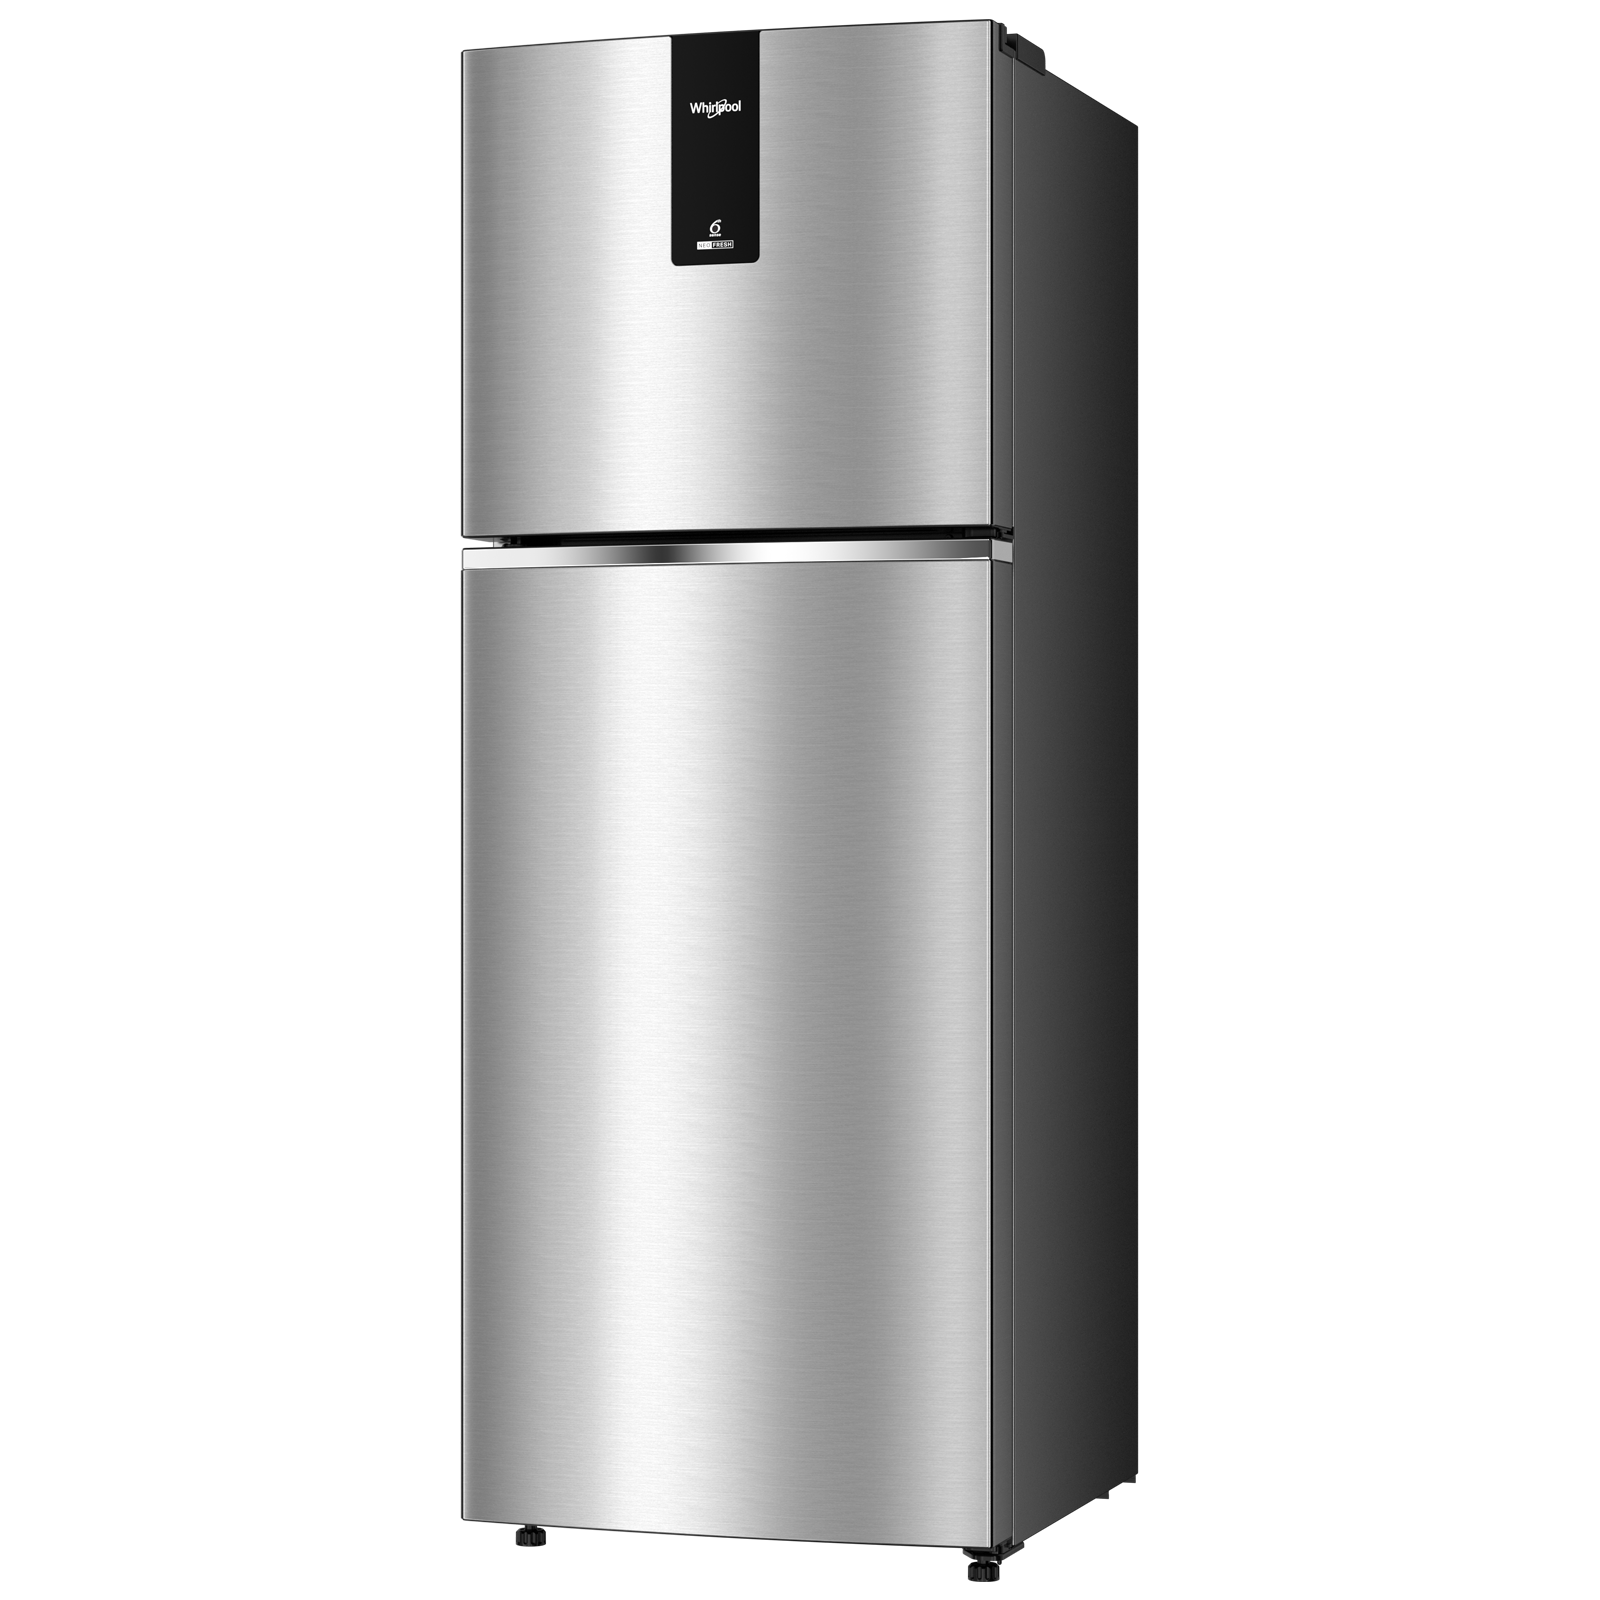 

Whirlpool Neofresh 235 Litres 2 Star Frost Free Double Door Refrigerator with Microblock Technology (22099, Grey)